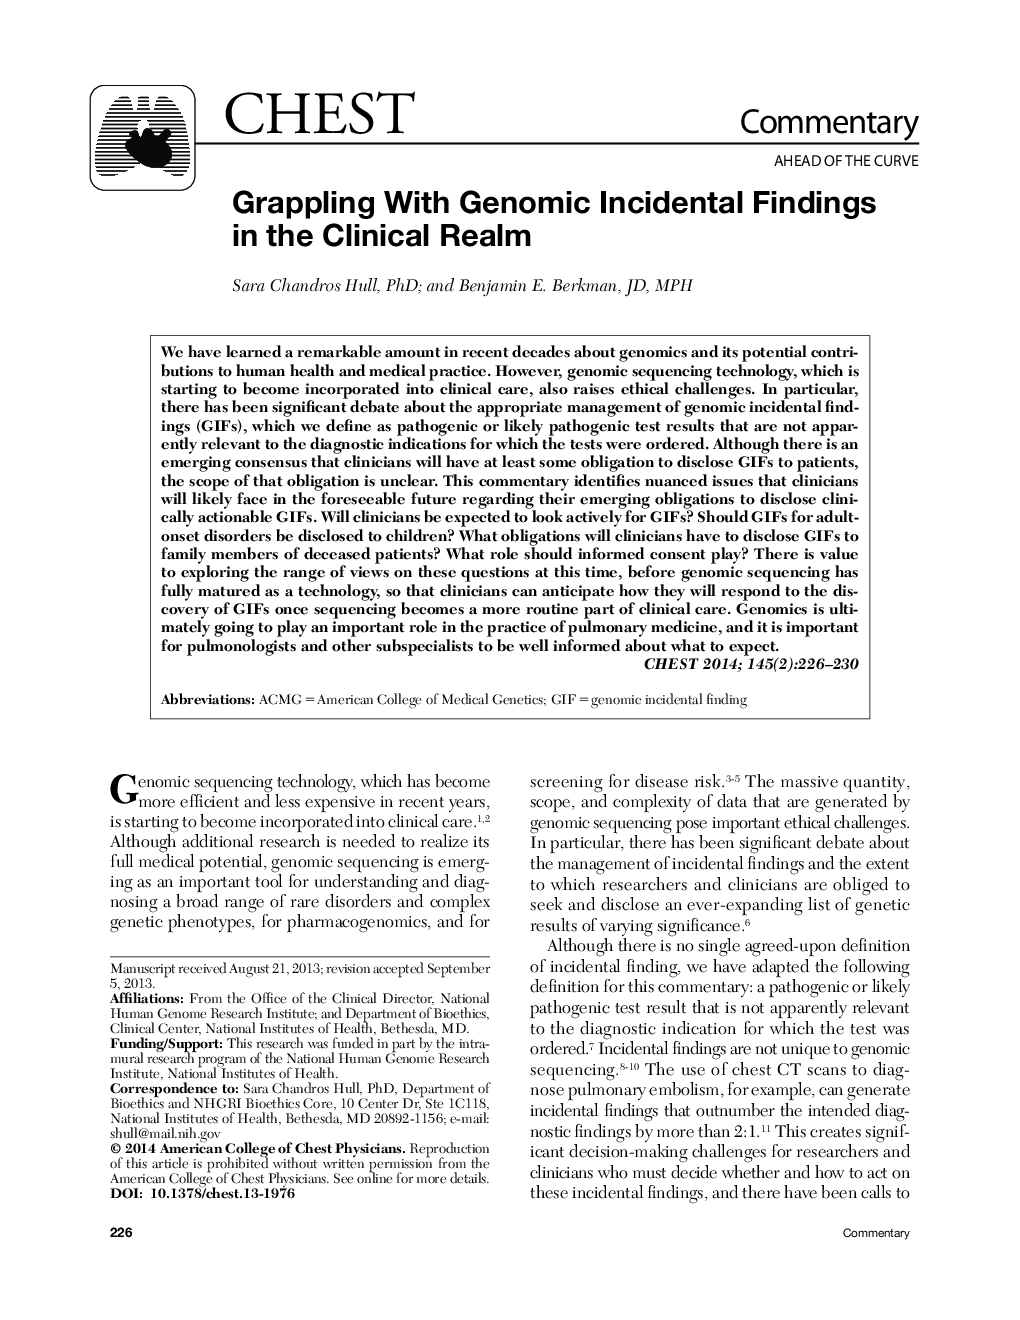 Grappling With Genomic Incidental Findings in the Clinical Realm